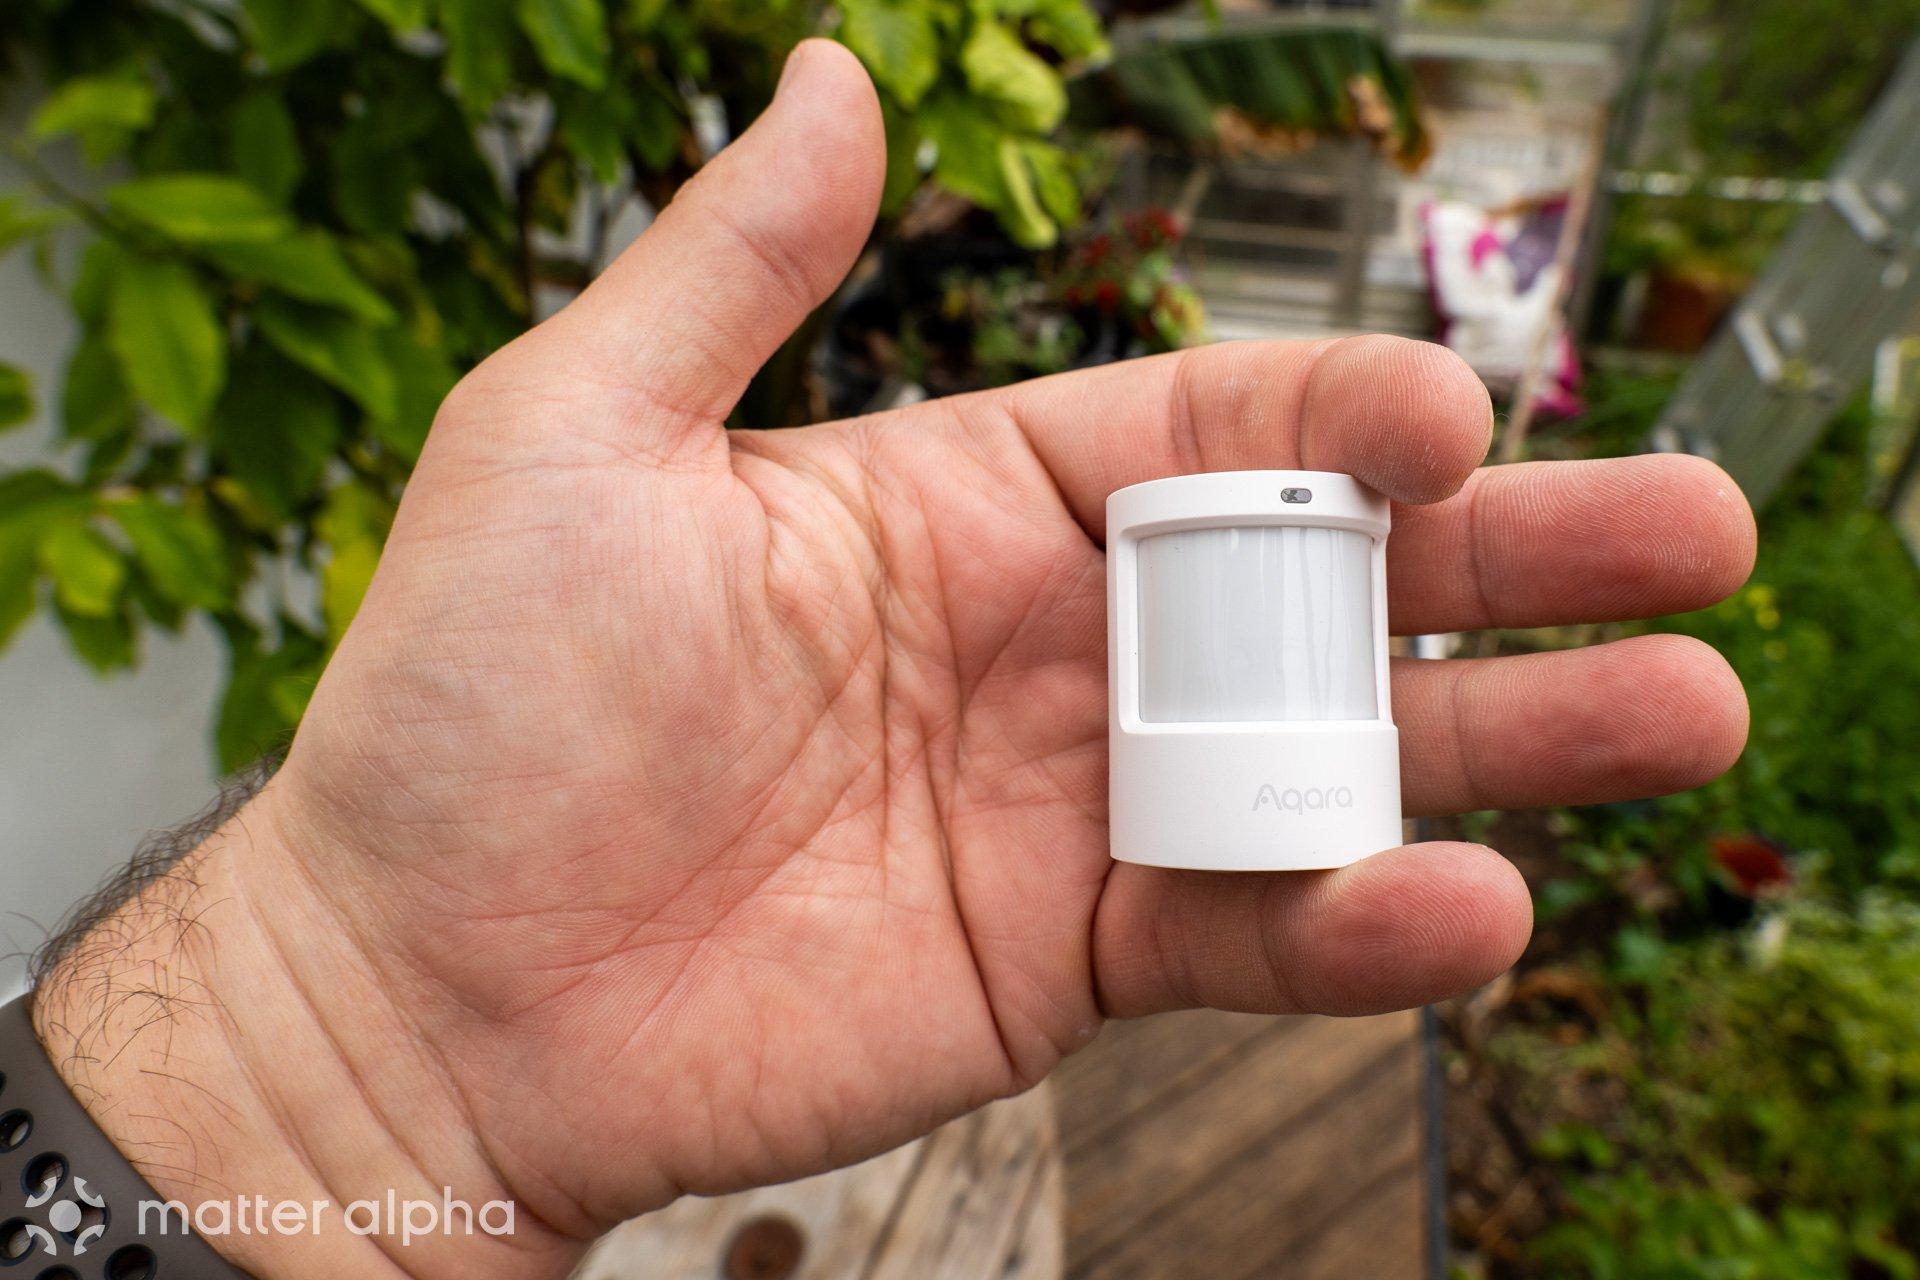 Aqara p2 motion sensor being held in hand to show minuscule size